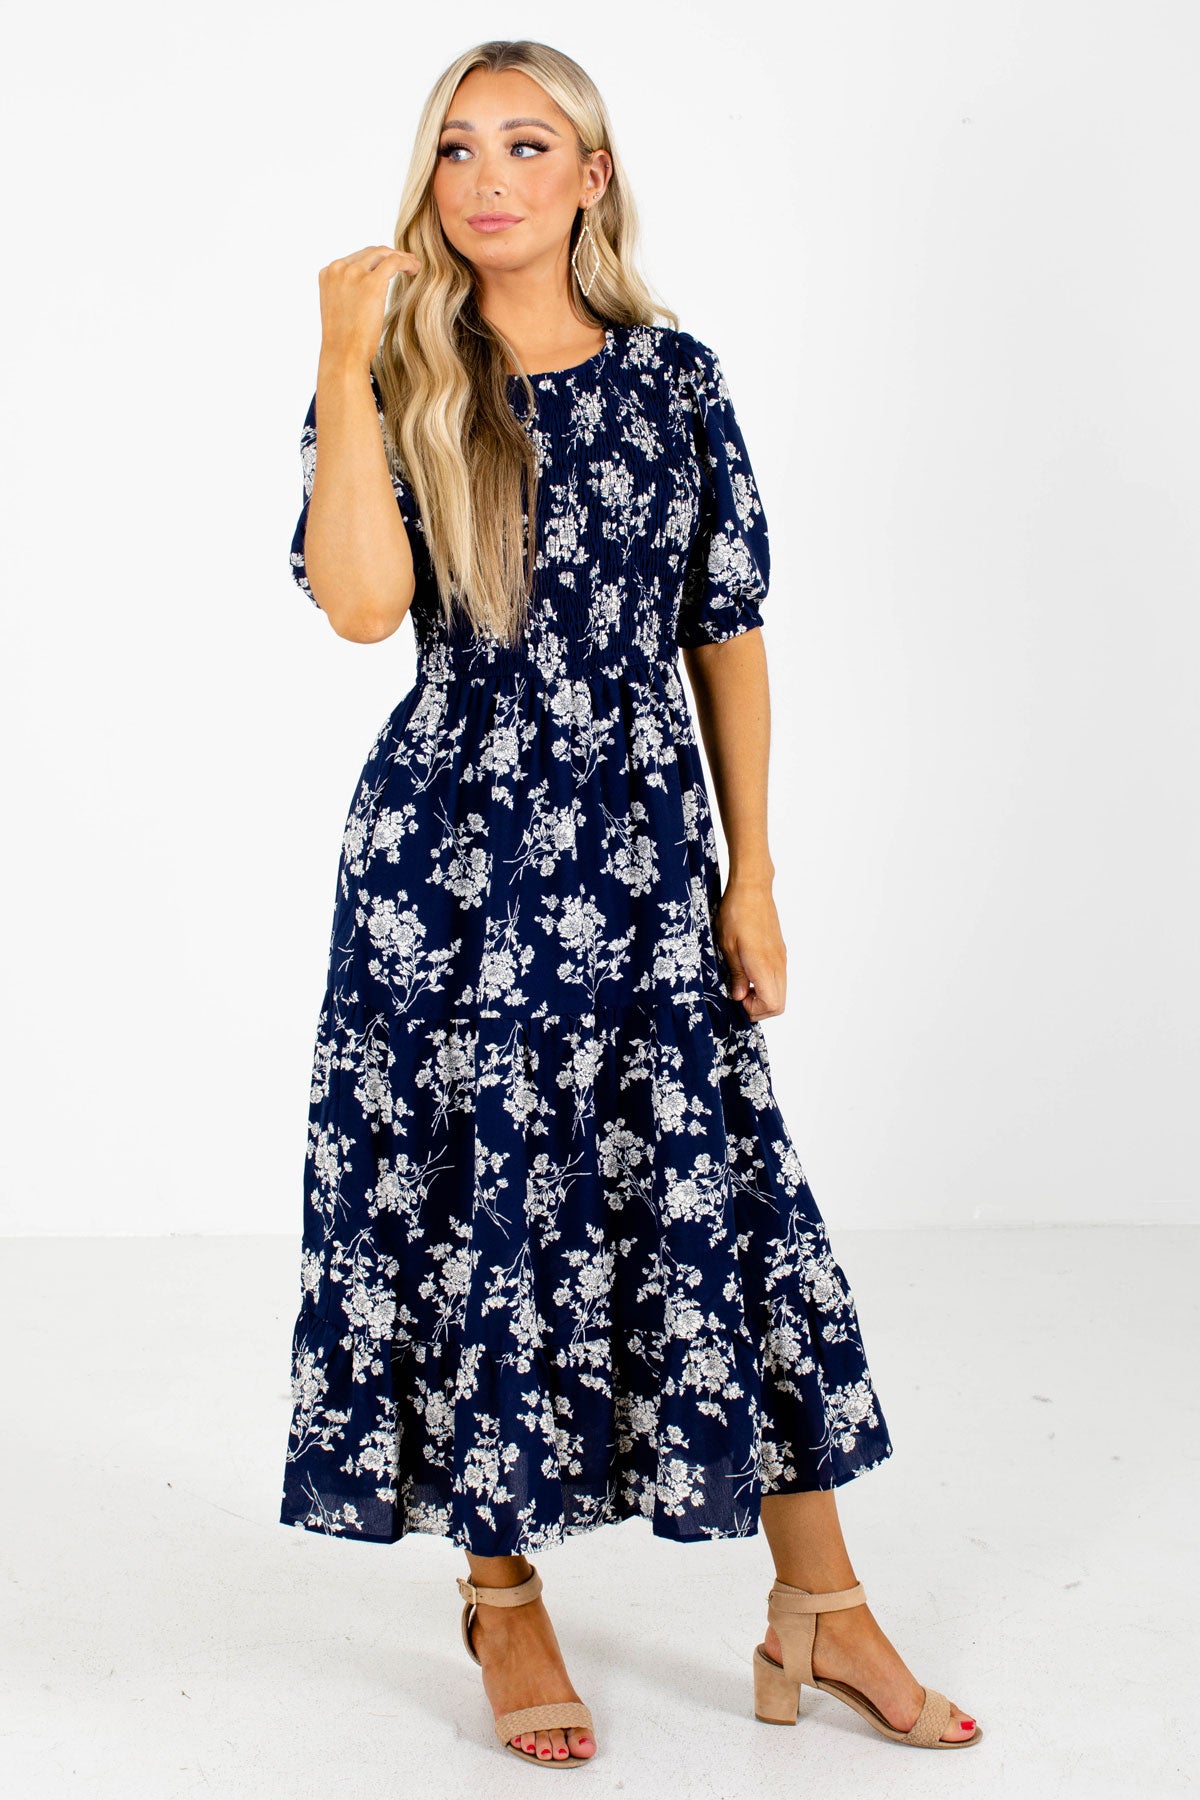 Navy Lightweight Material Dress Boutique Clothing for Women